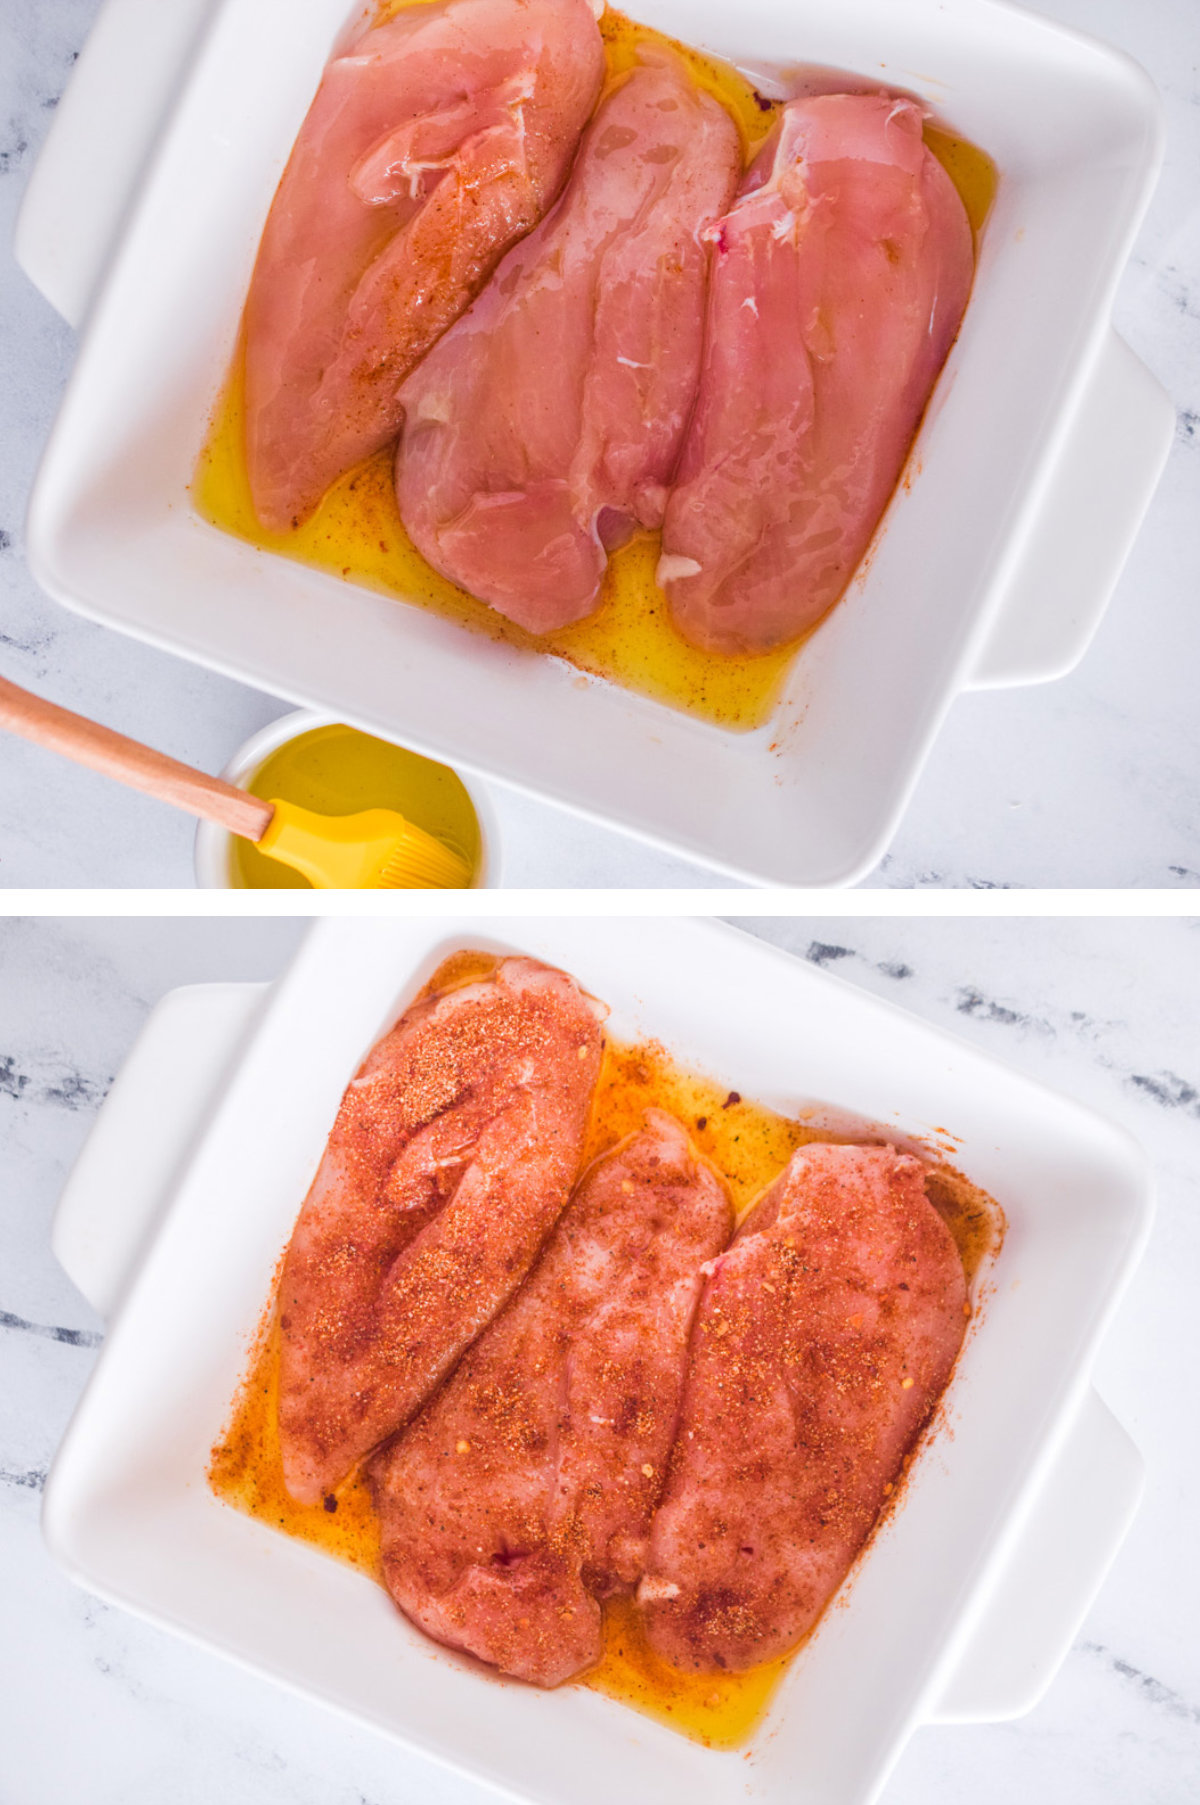 Two overhead images in one: 1. Raw Chicken breasts in a white baking dish with oil. 2. Chicken breasts are sprinkled with seasoning. 